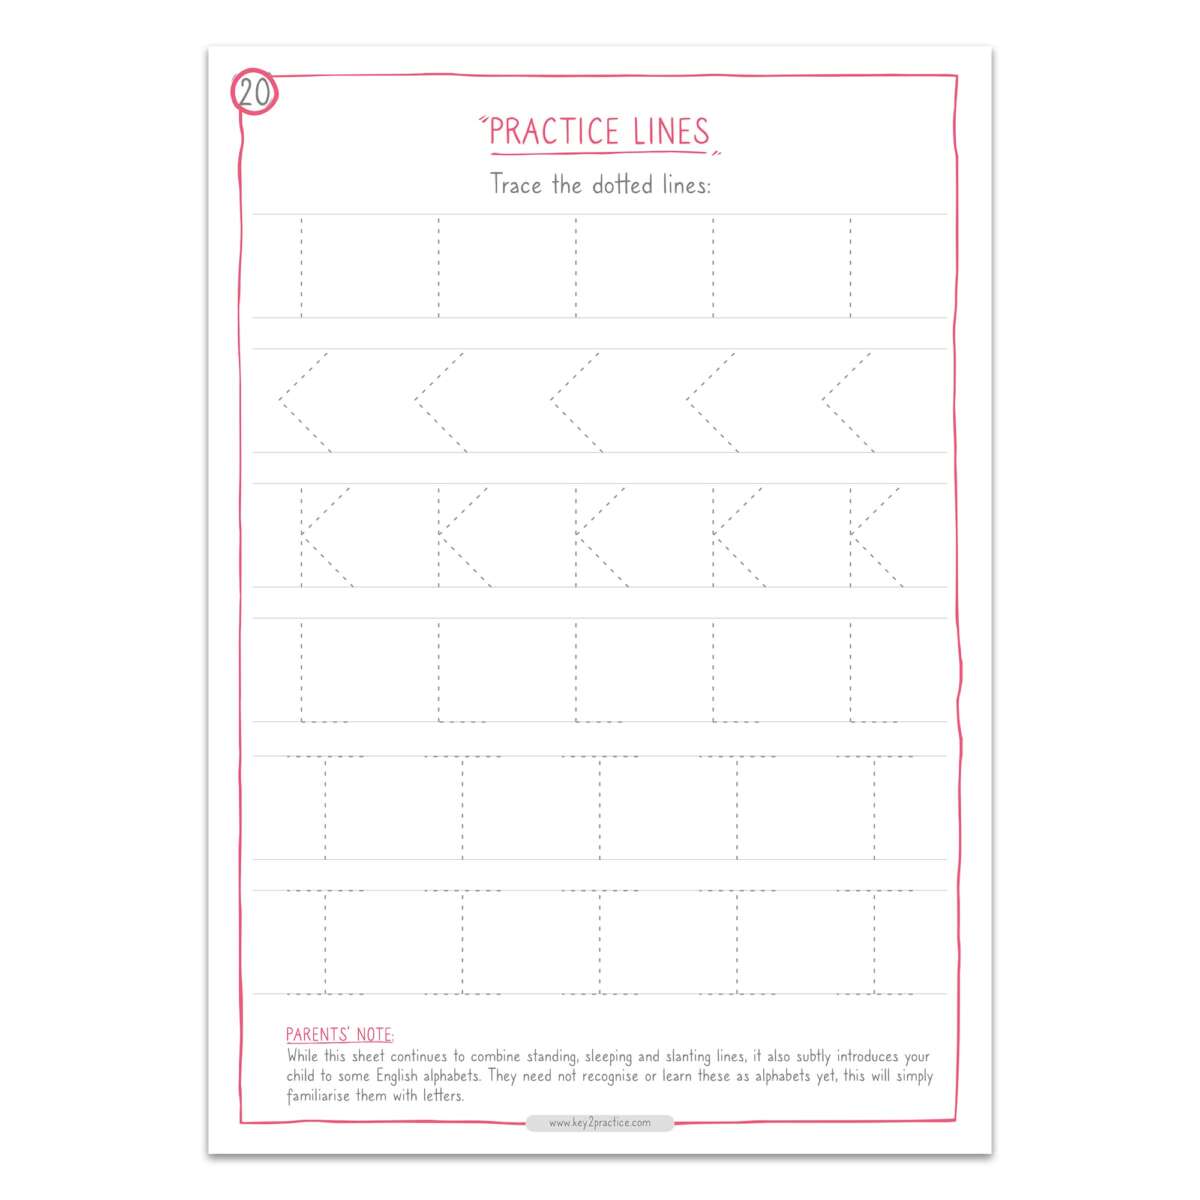 STEP TWO (practice lines) worksheets for english pre-primary